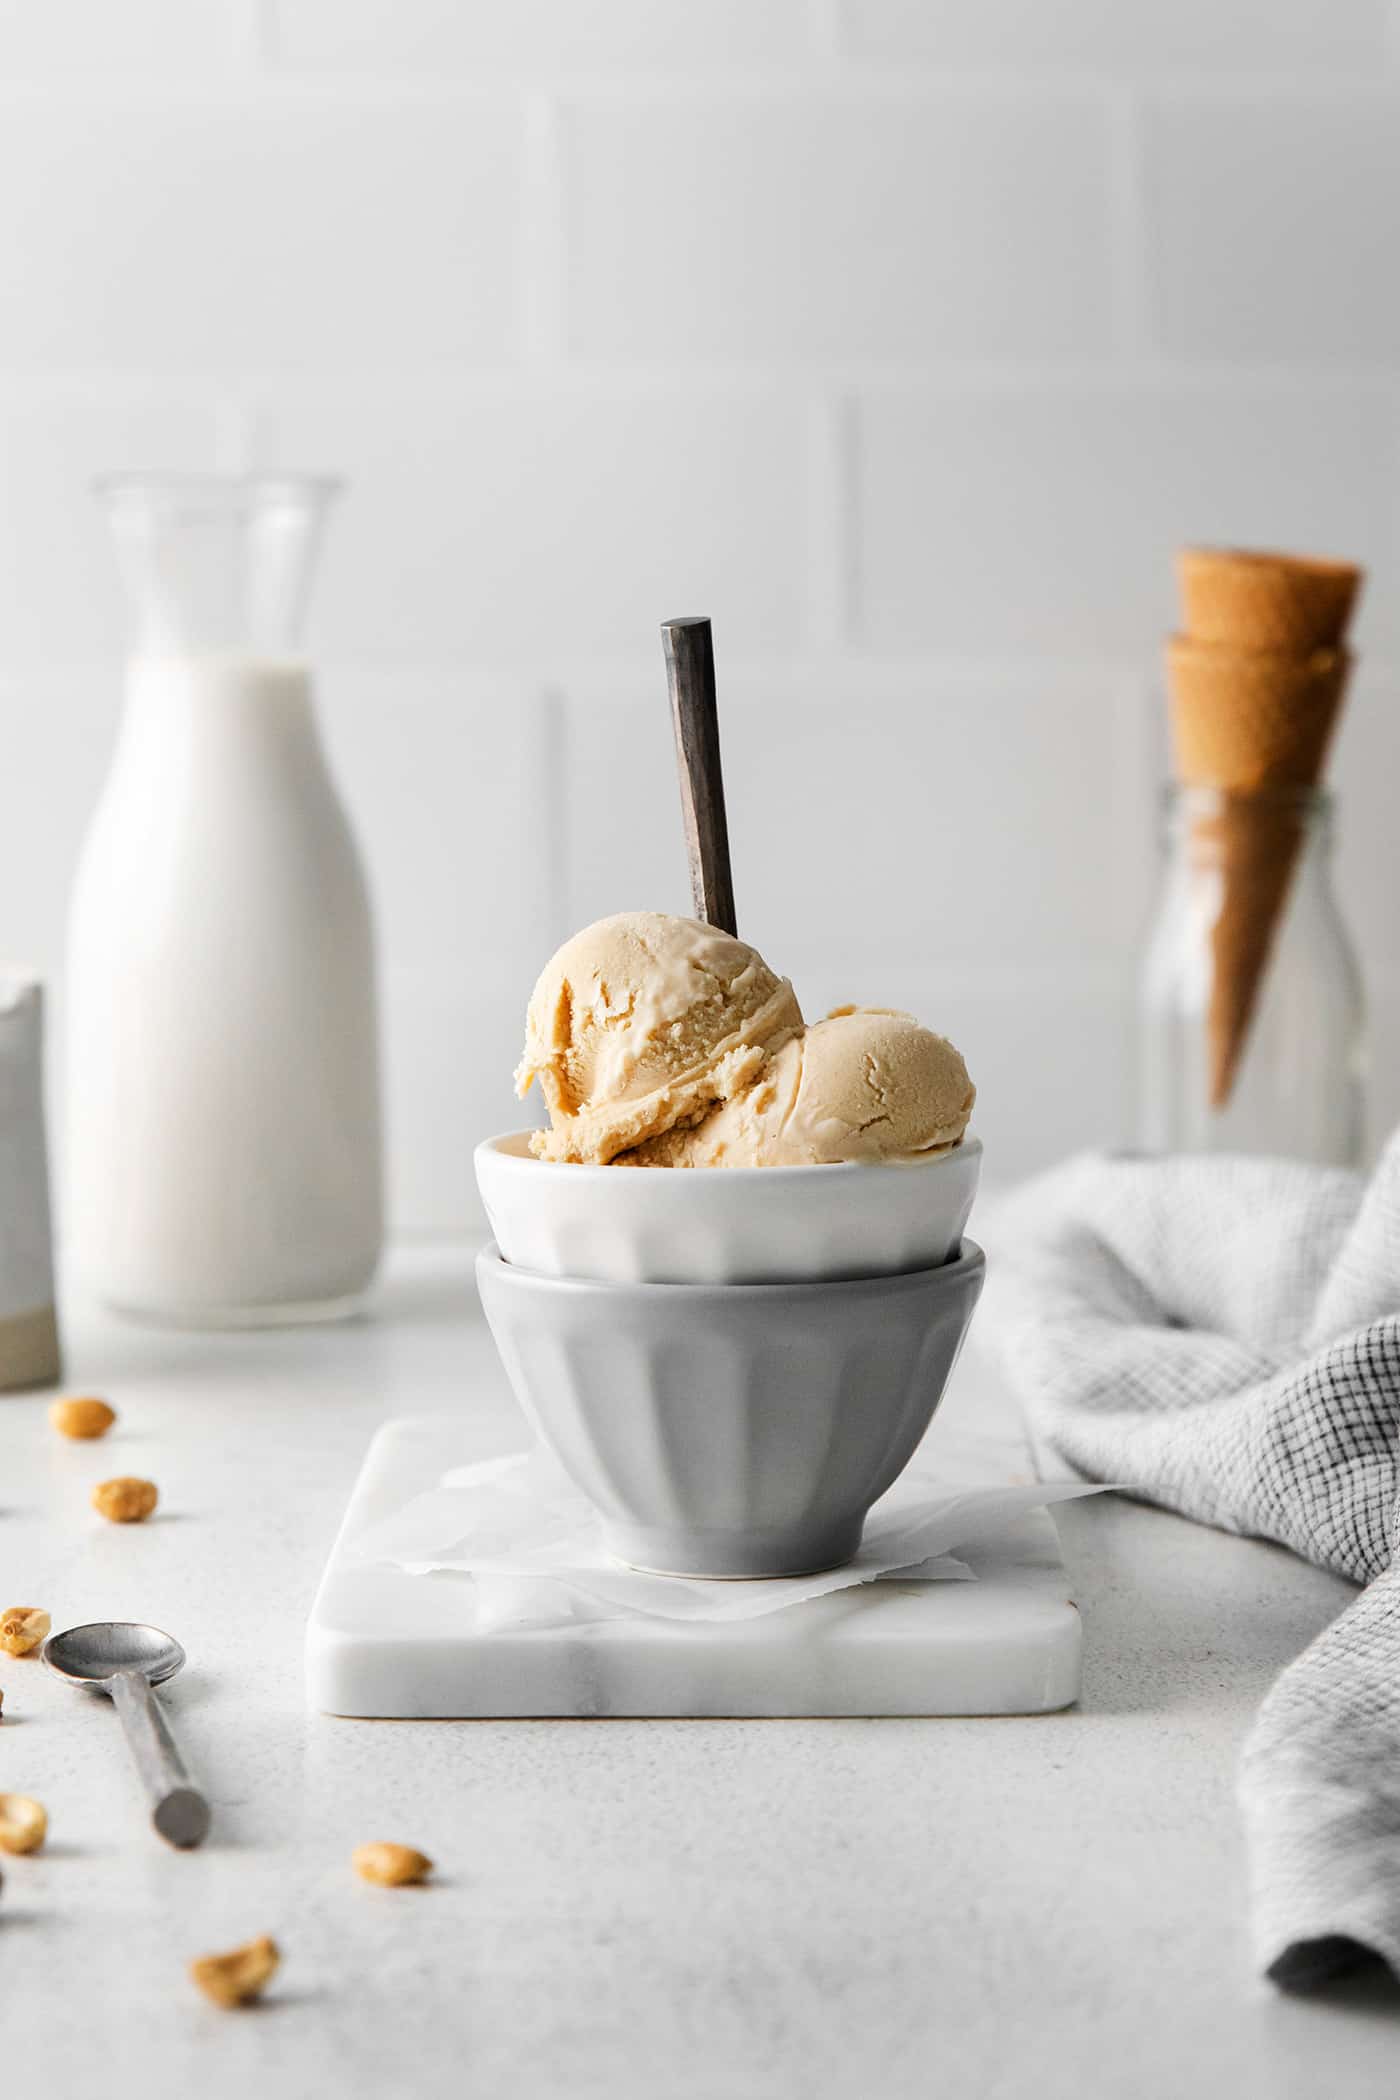 Homemade peanut butter ice cream in a bowl with a spoon